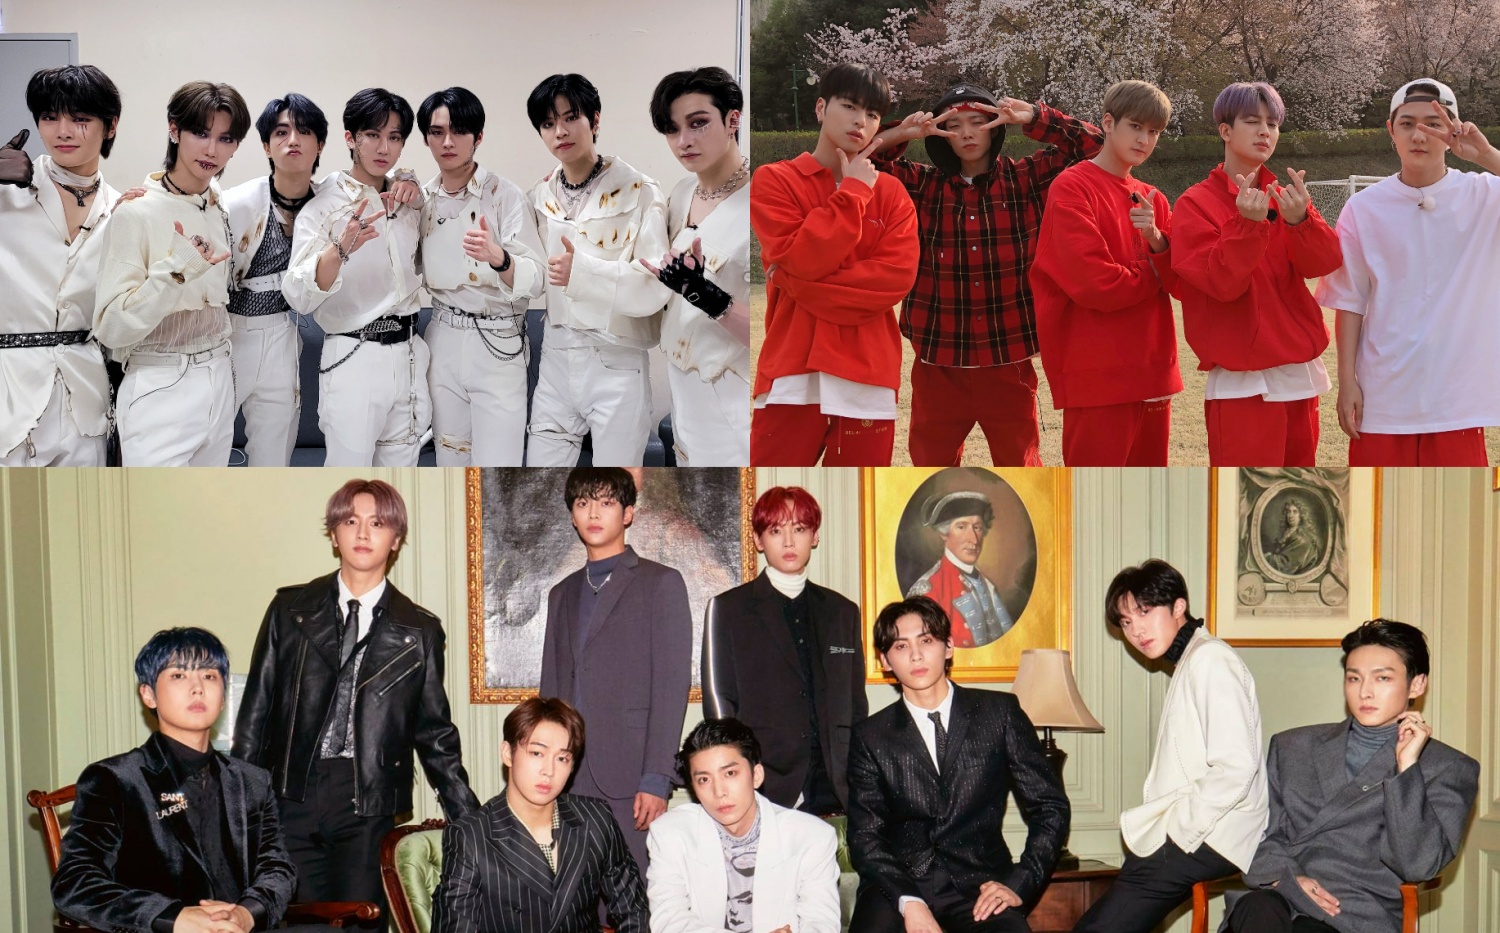 Mnet 'Kingdom' Episode 7: From Stray Kids to SF9, Final Results and